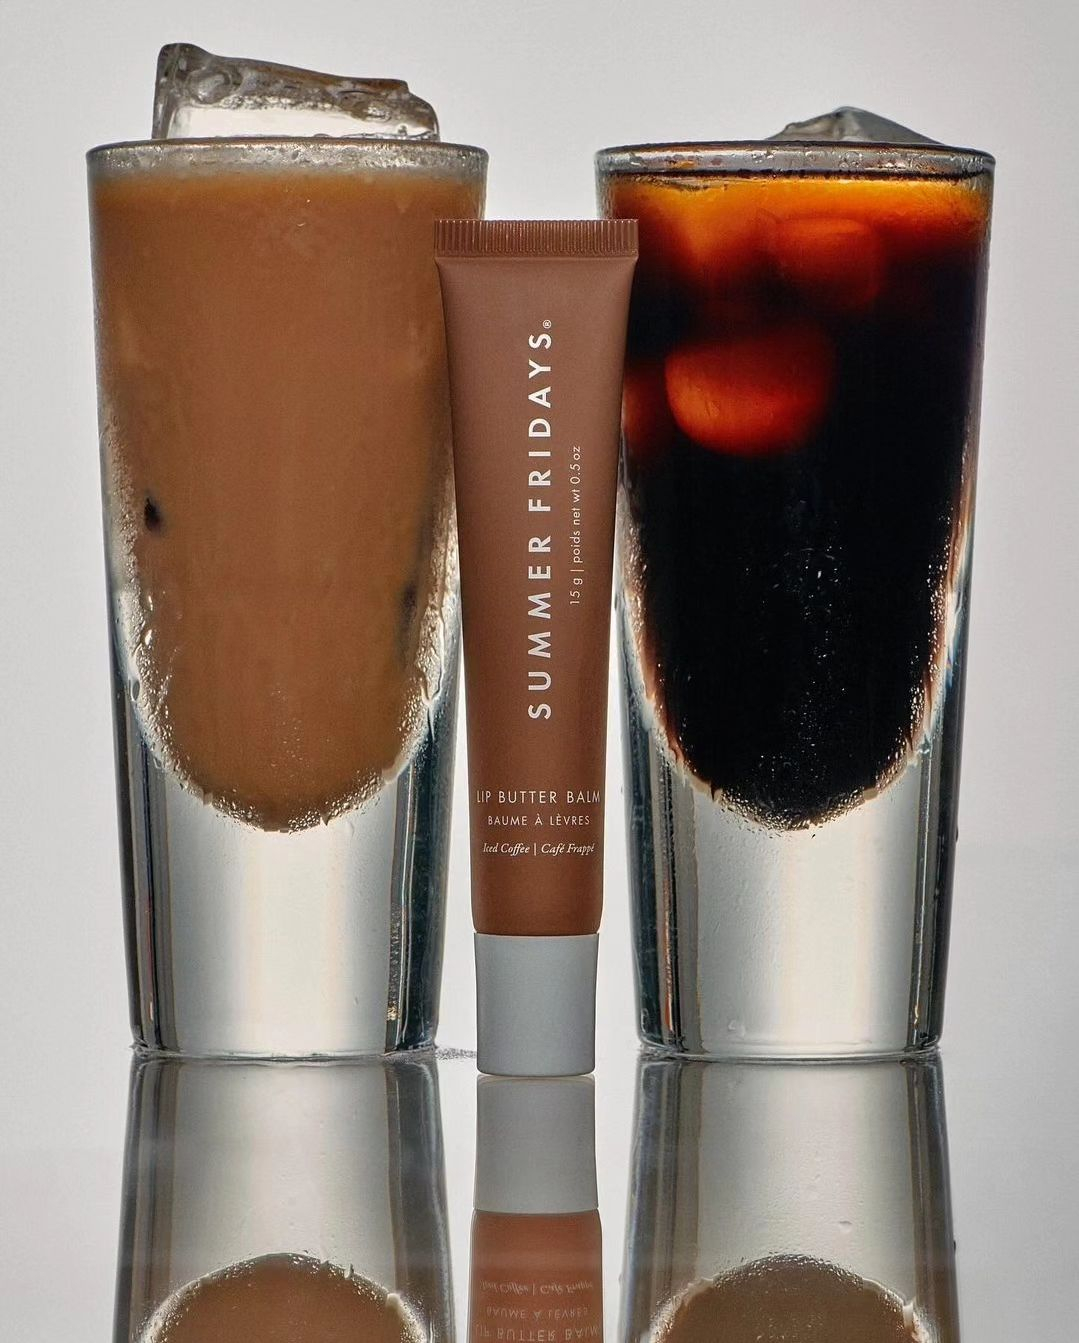 Summer Fridays Lip Butter Balm in Iced Coffee